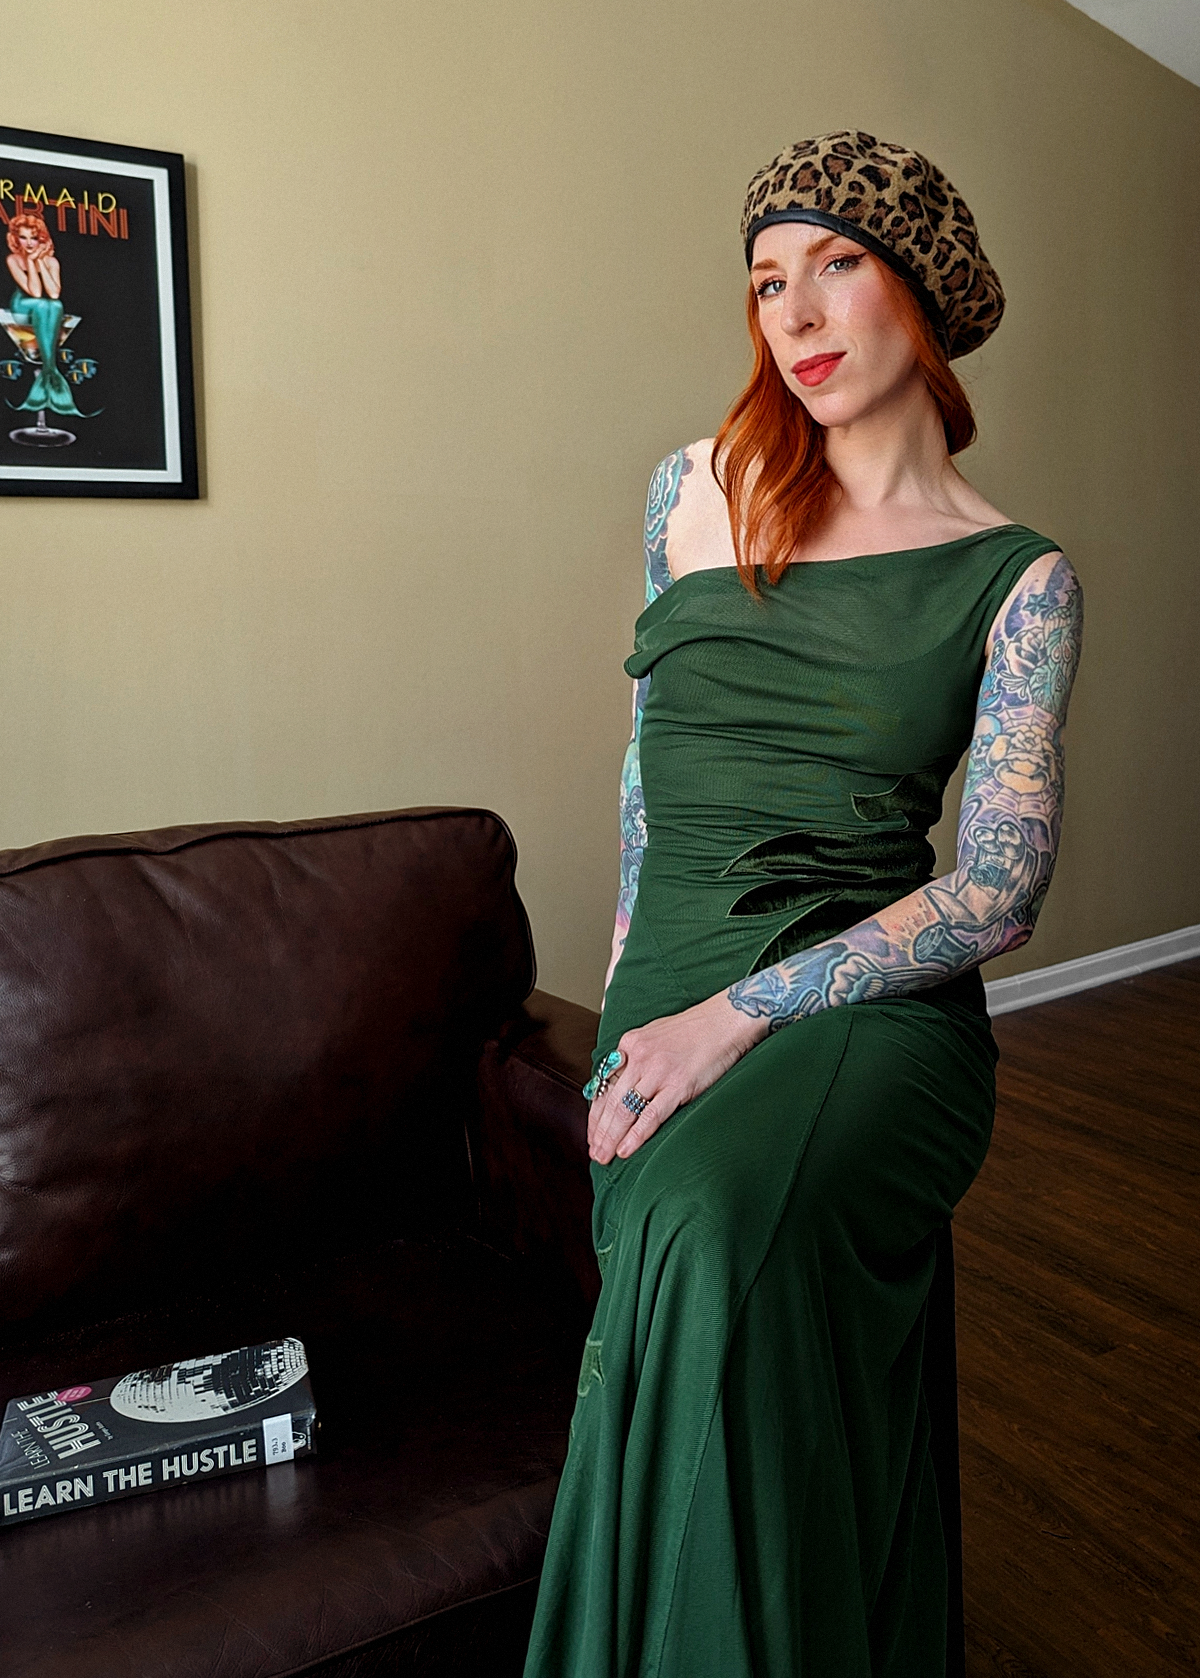 90s inspired romantic slinky stretch green mesh bias cut maxi dress with green velvet blaze accents. Off or on shoulder design. By Another Girl, ethical sustainable, and made with recycled materials